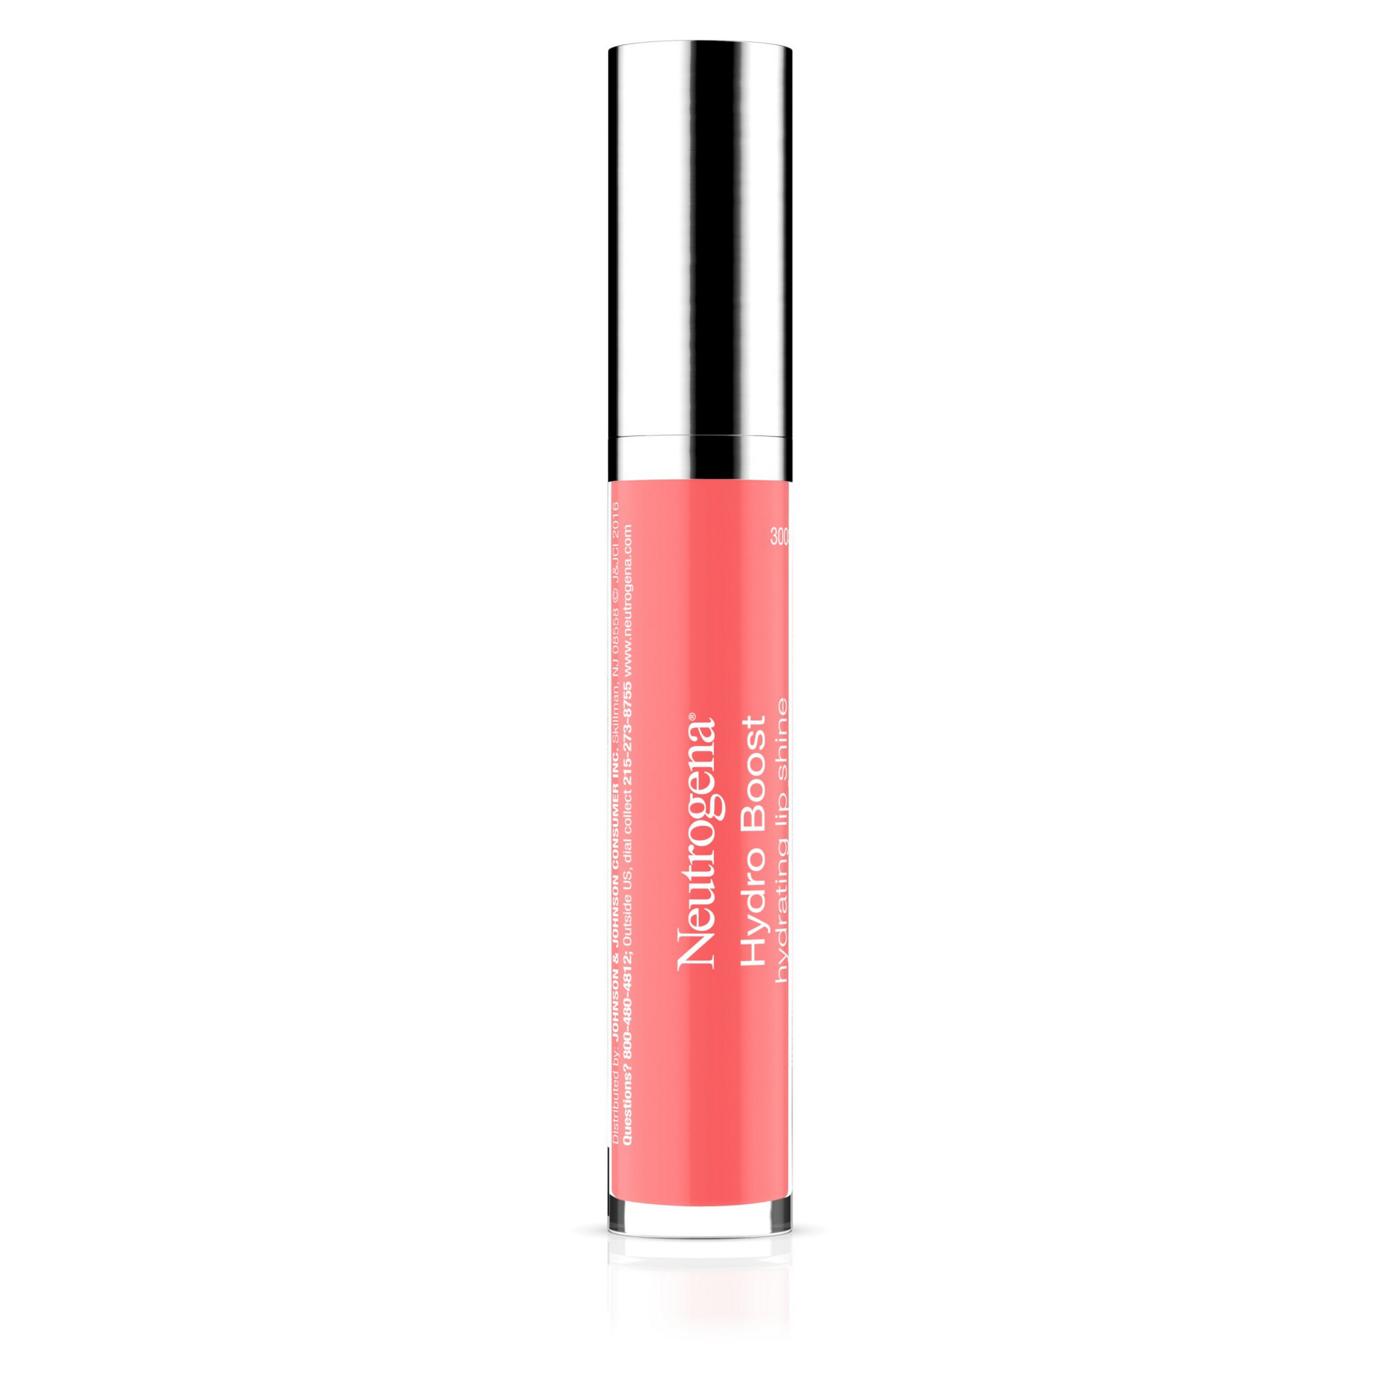 Neutrogena Hydro Boost Hydrating Lip Shine 30 Flushed Coral Color; image 2 of 3